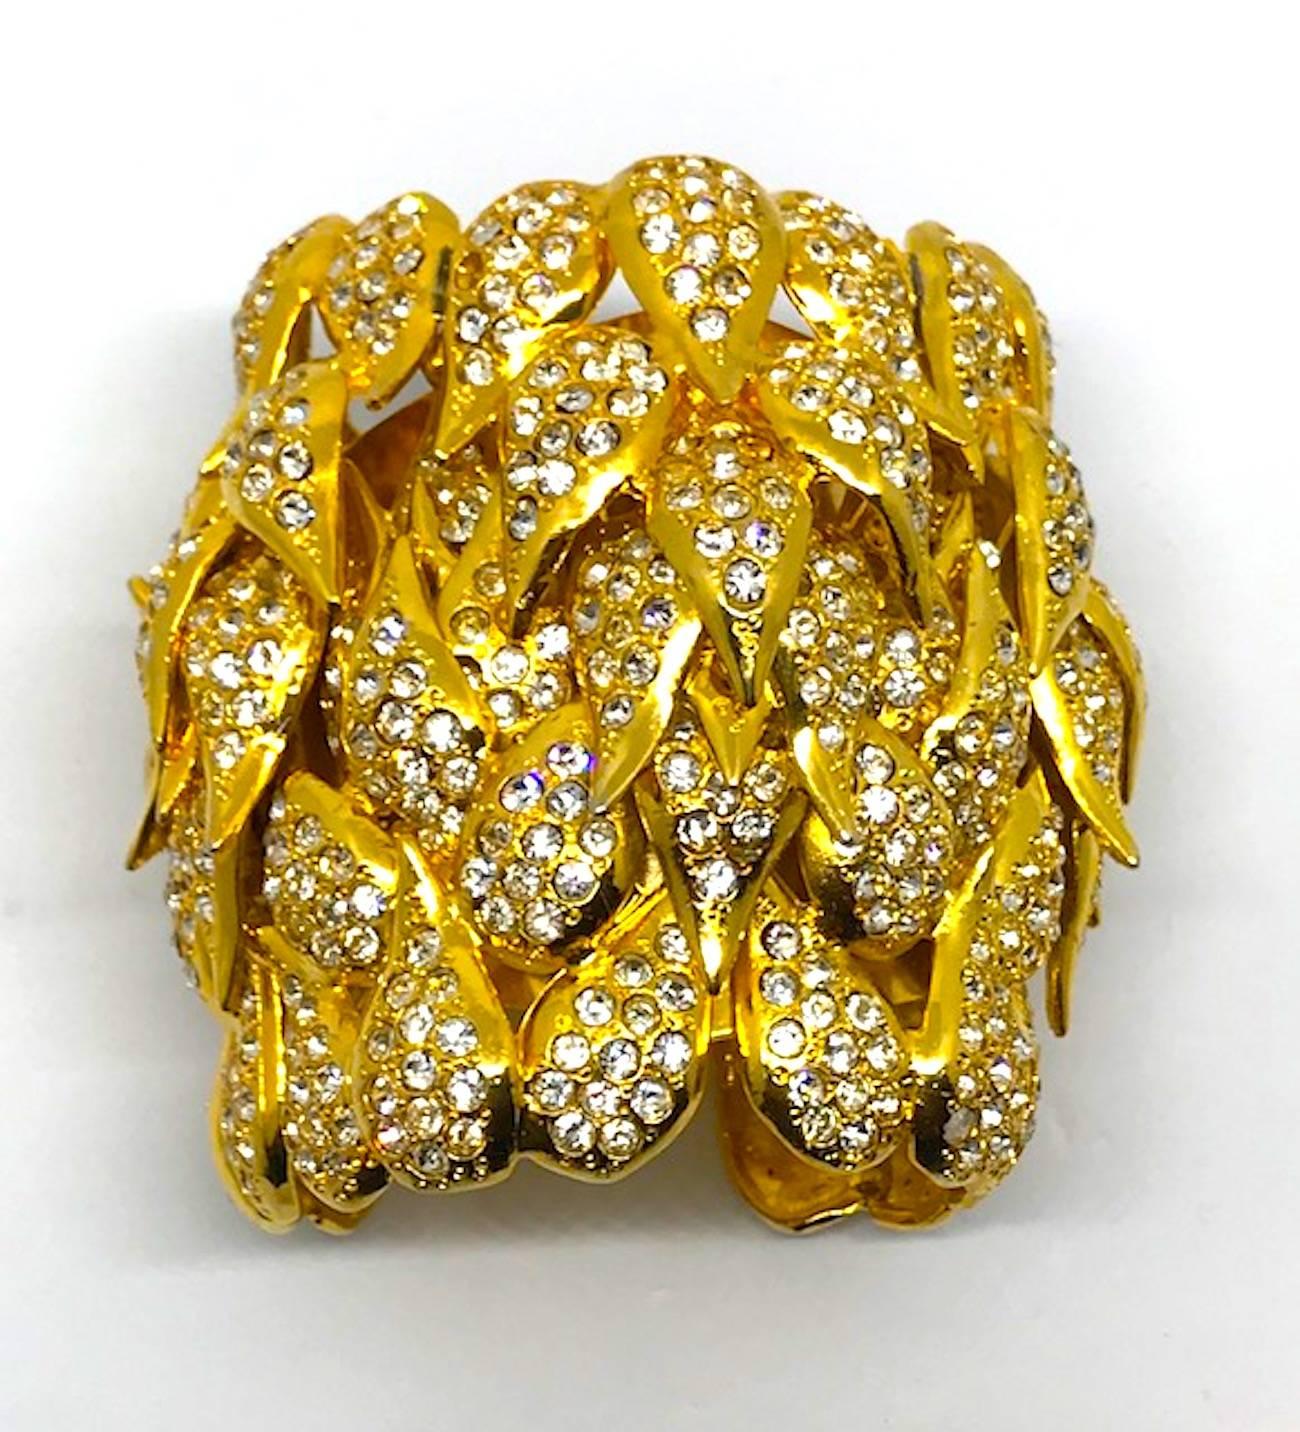 De Liguoro gold cuff bracelet from Actress Elsa Martinelli's personal collection 6